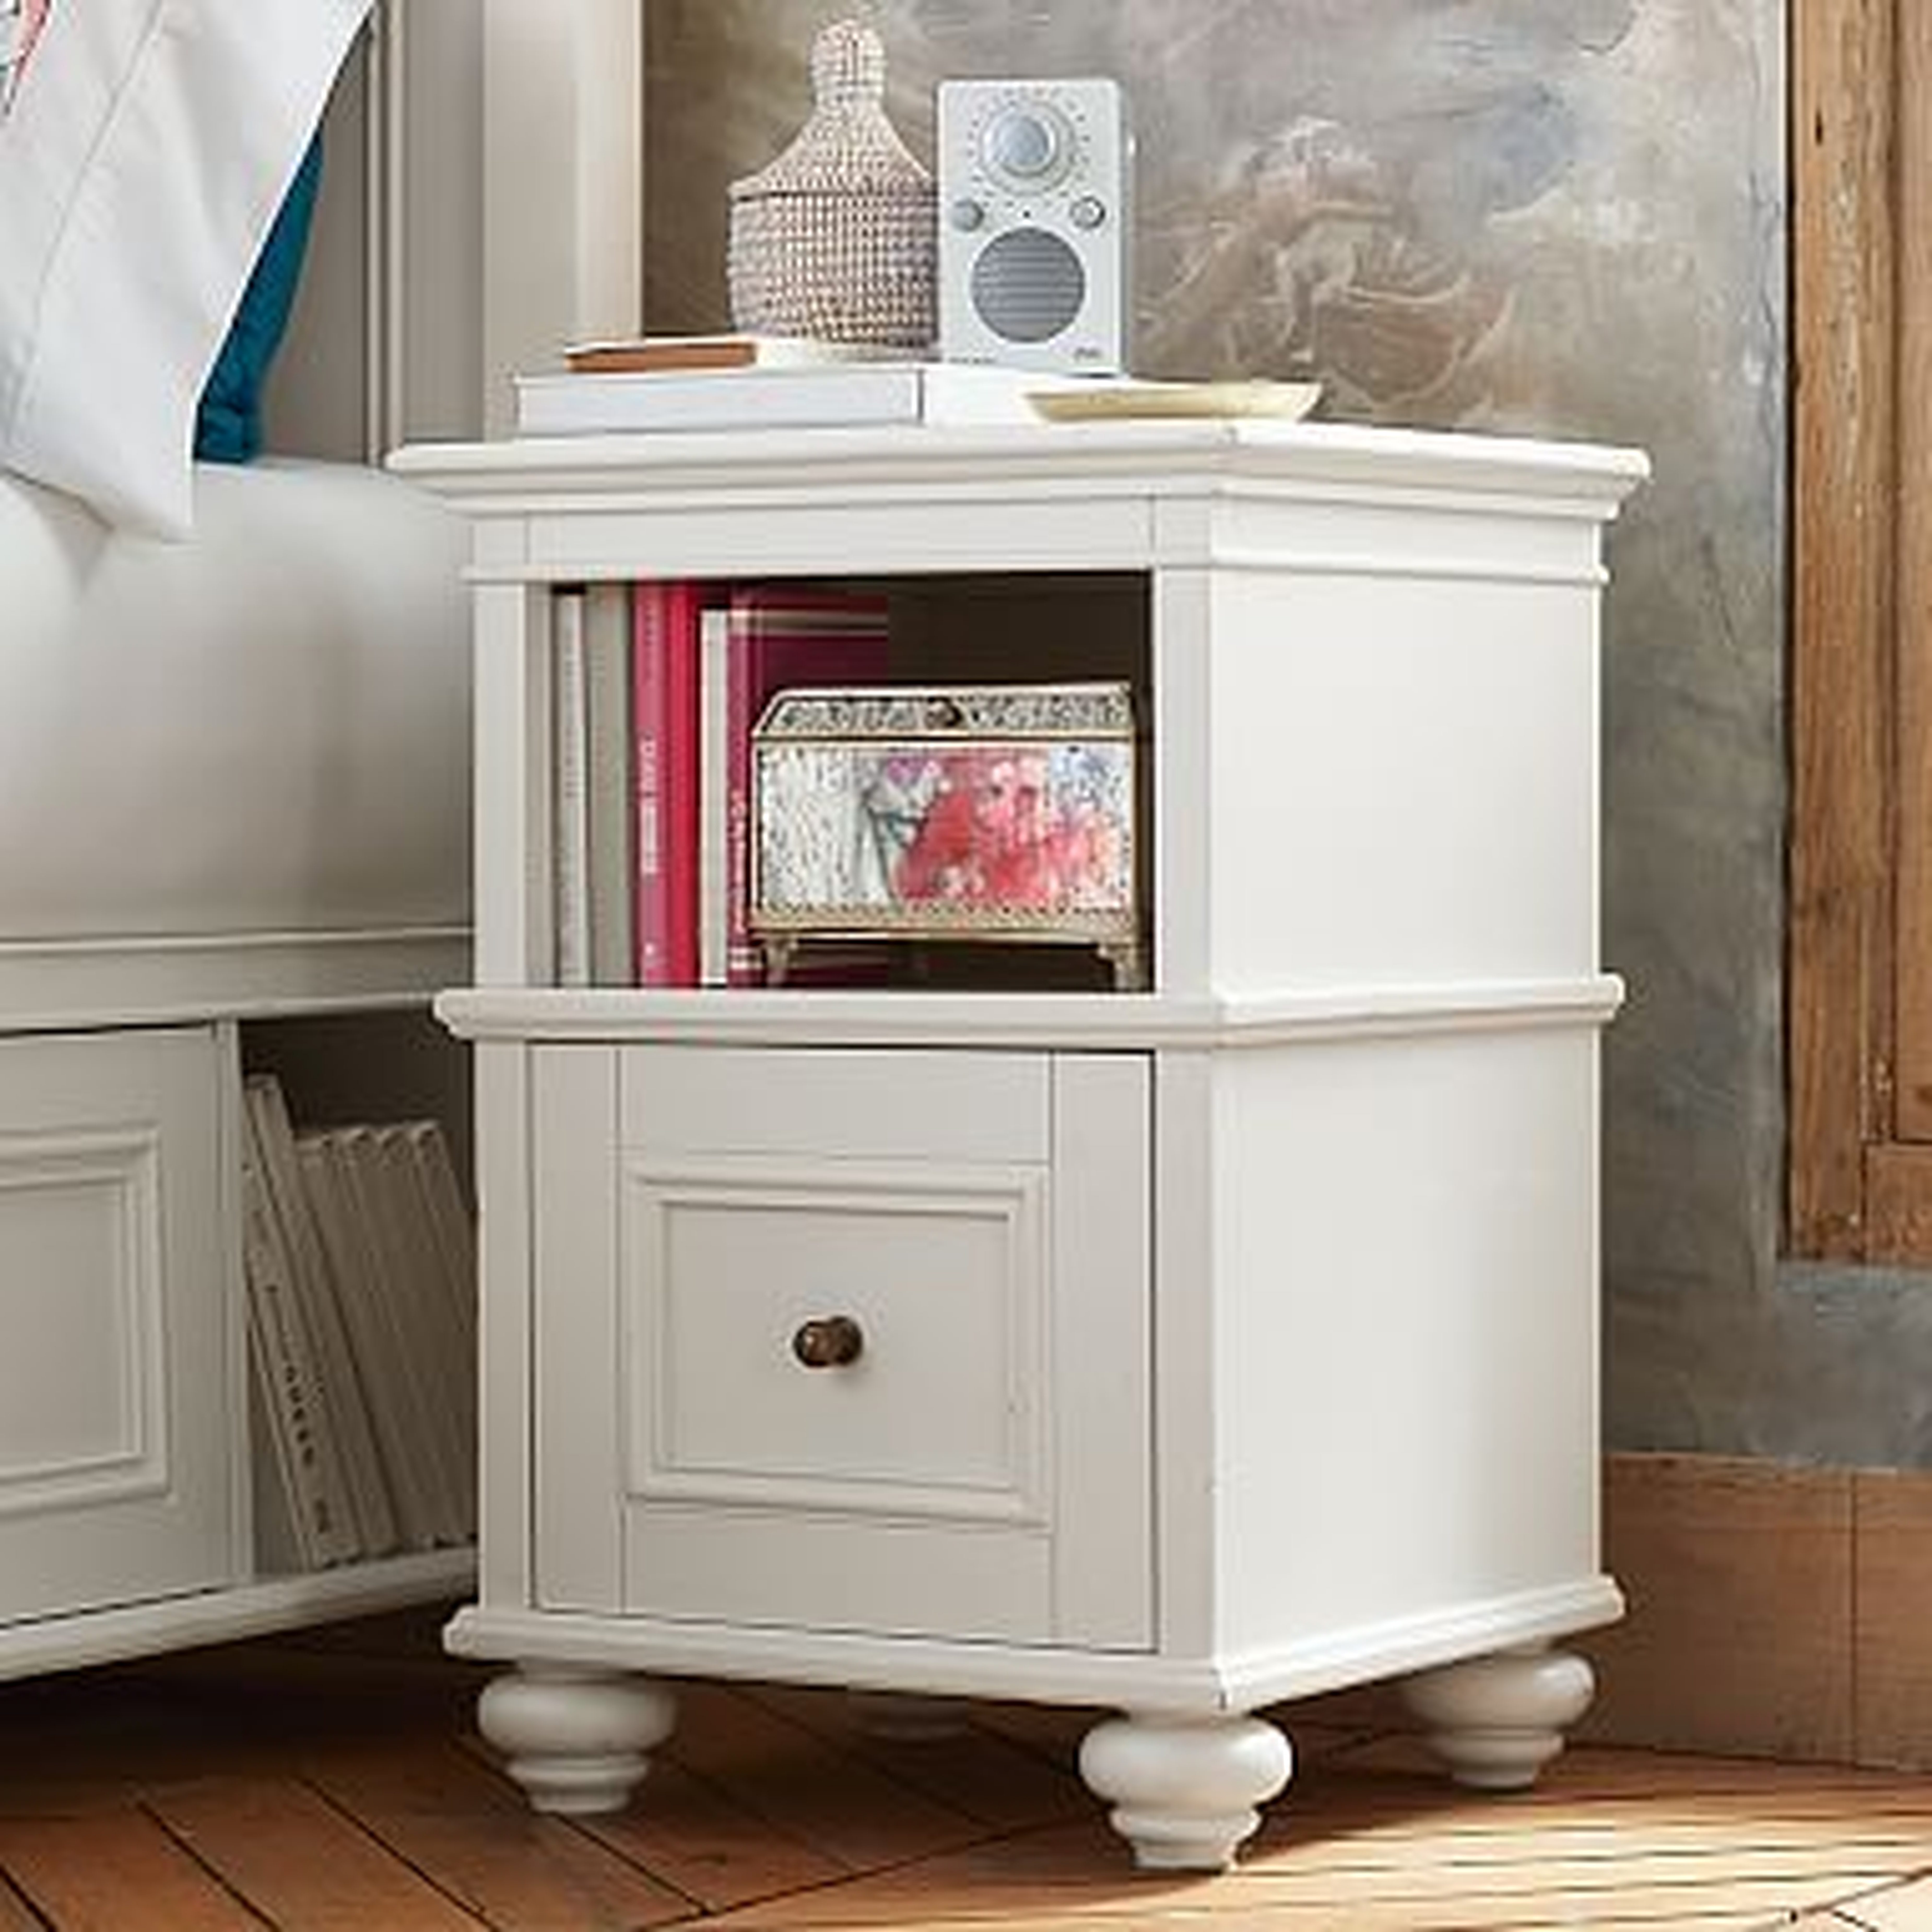 Chelsea Nightstand, Simply White - Pottery Barn Teen